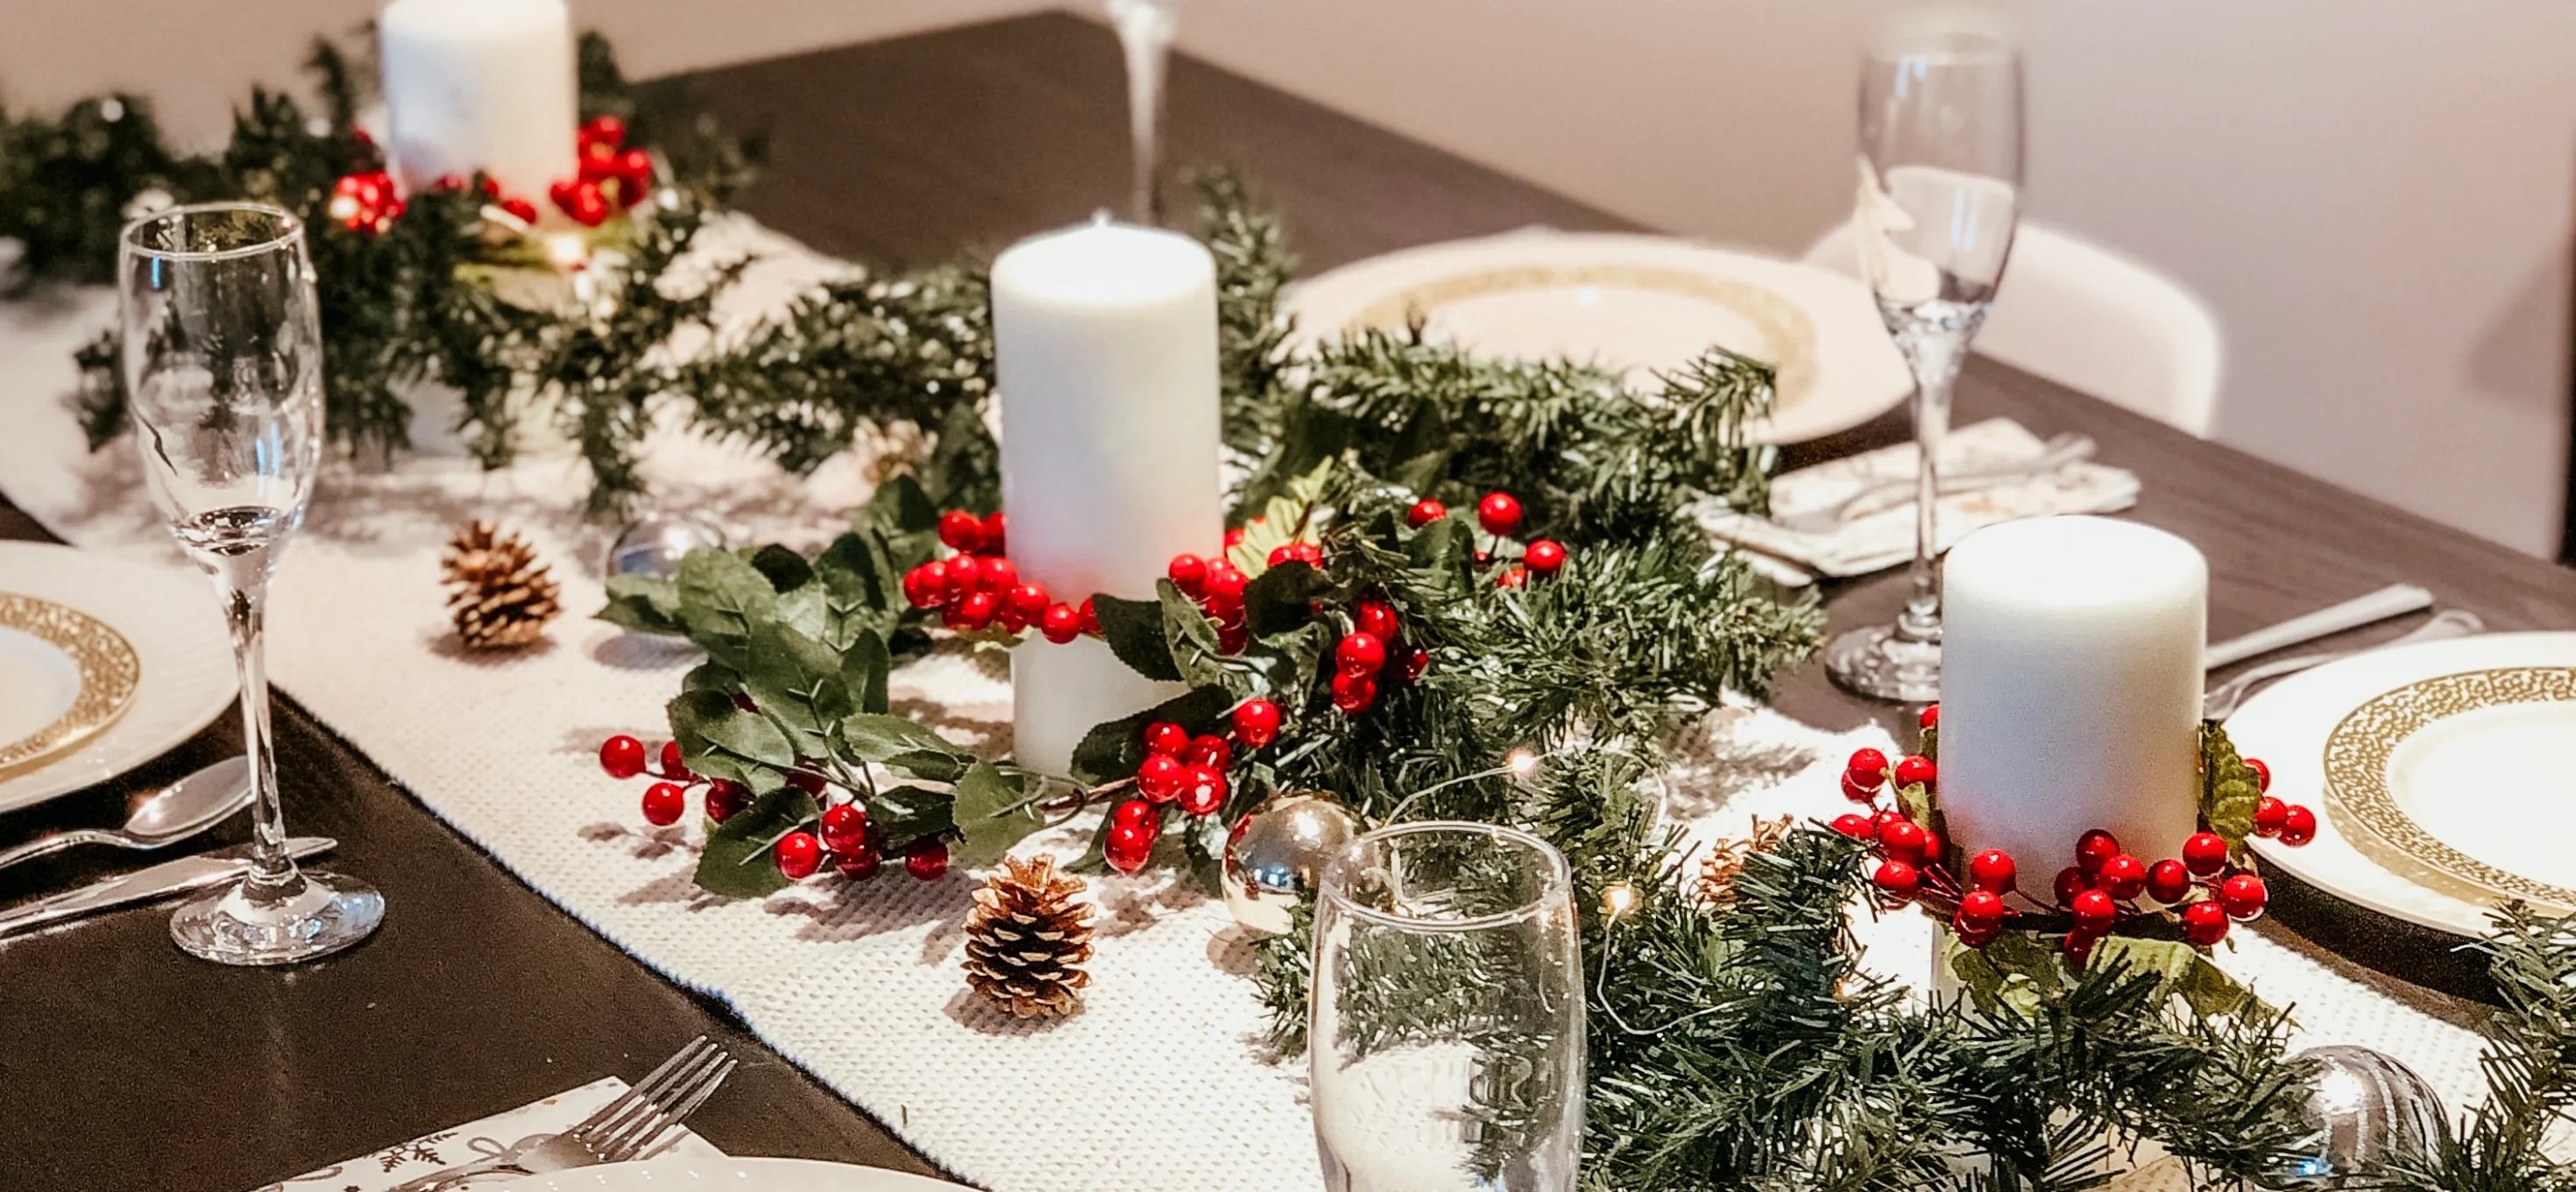 festive holiday tablescape for christmas dinner with light table runner, greenery, red berries, and pine cones with candles for a cozy feel